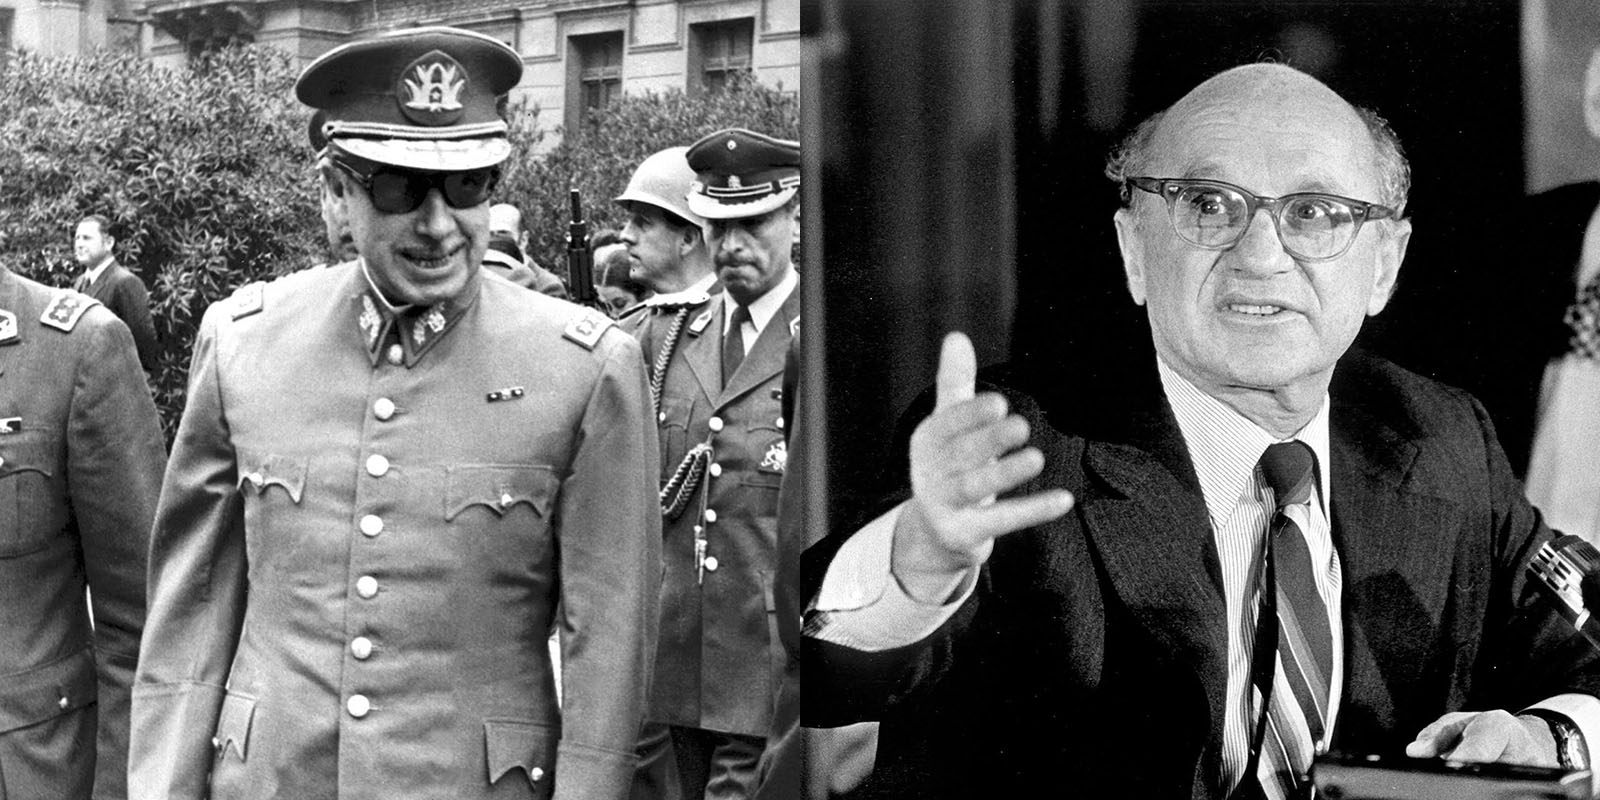 A portrait of Augusto Pinochet in uniform in 1973. (Photo by STF/AFP/Getty Images.) And Milton Friedman lecturing. (Photo courtesy of the University of Chicago.)